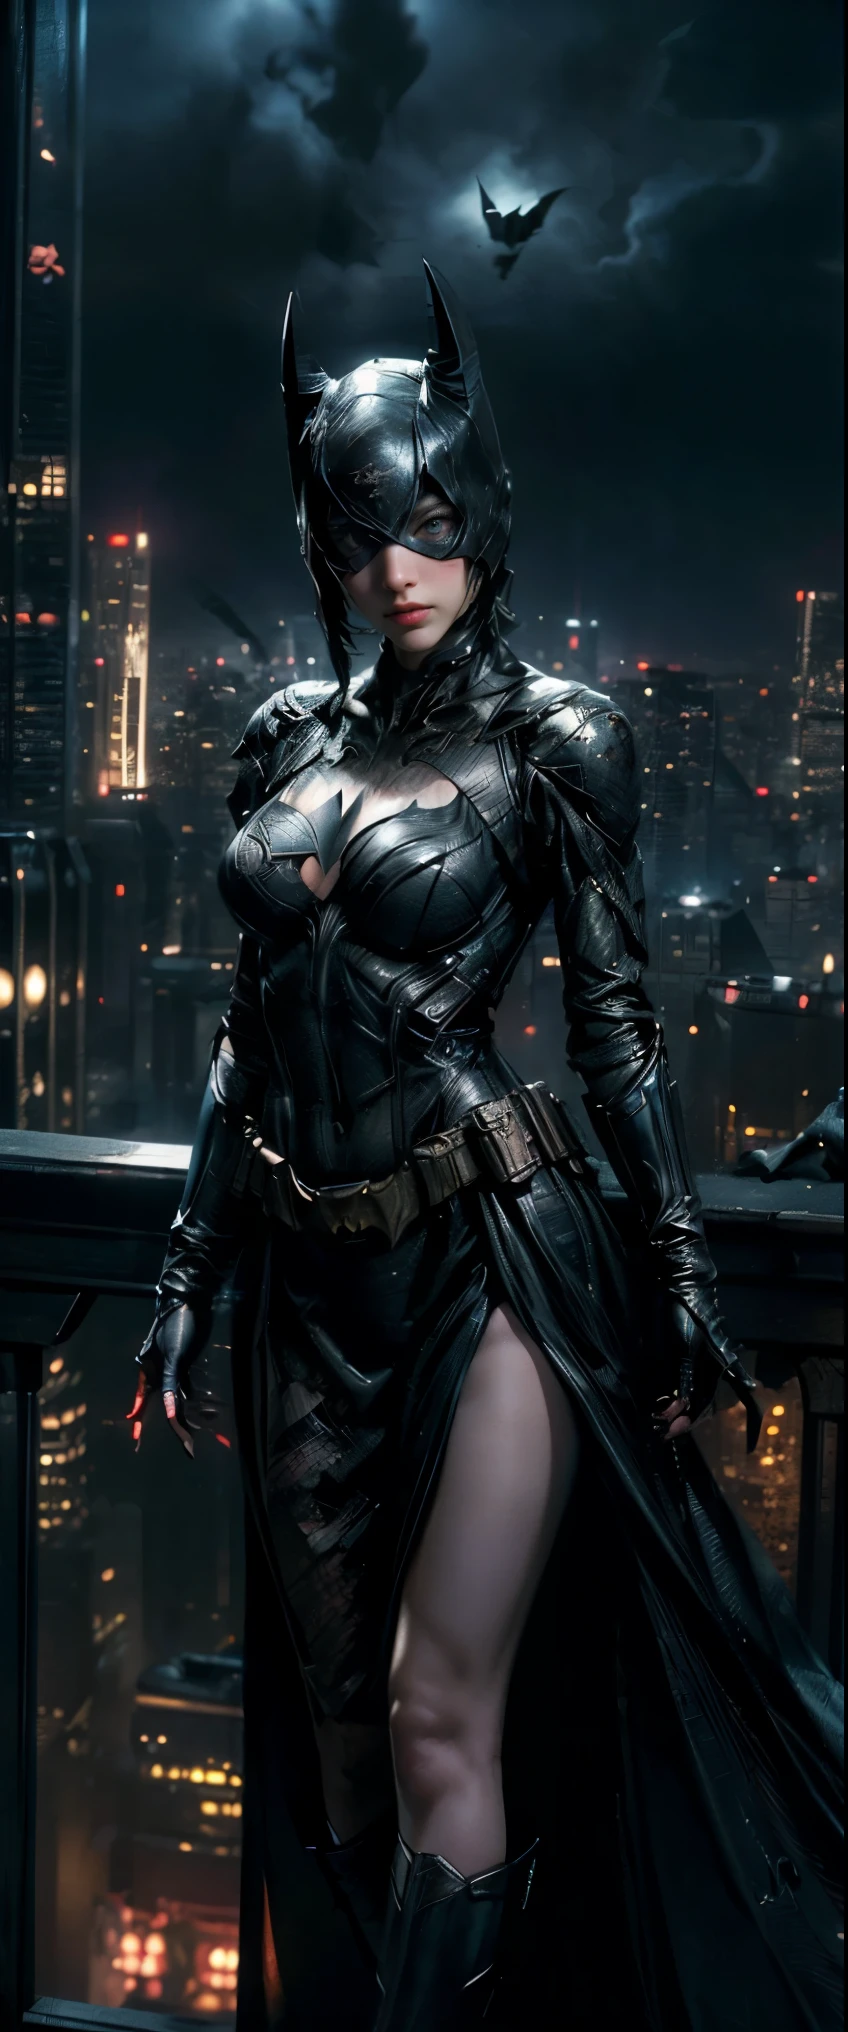 ((Masterpiece, Top Quality, High Resolution, Photorealistic, Raw, 8K wallpaper)), (huge stunning goddess shot, very hot and sexy, jaw dropping beauty, perfect proportions, beautiful body, slim body beauty: 1.4), batman standing on Rooftop overlooking city skyline at night, gotham city background, nighttime in gotham city, gotham city, from movie batman, gotham city double exposure, gotham city style, film still of batman, metropolis filmic gotham city, cyberpunk batman, still image from batman movie, in batman movie still cinematic, gotham setting, the batman, gotham, 